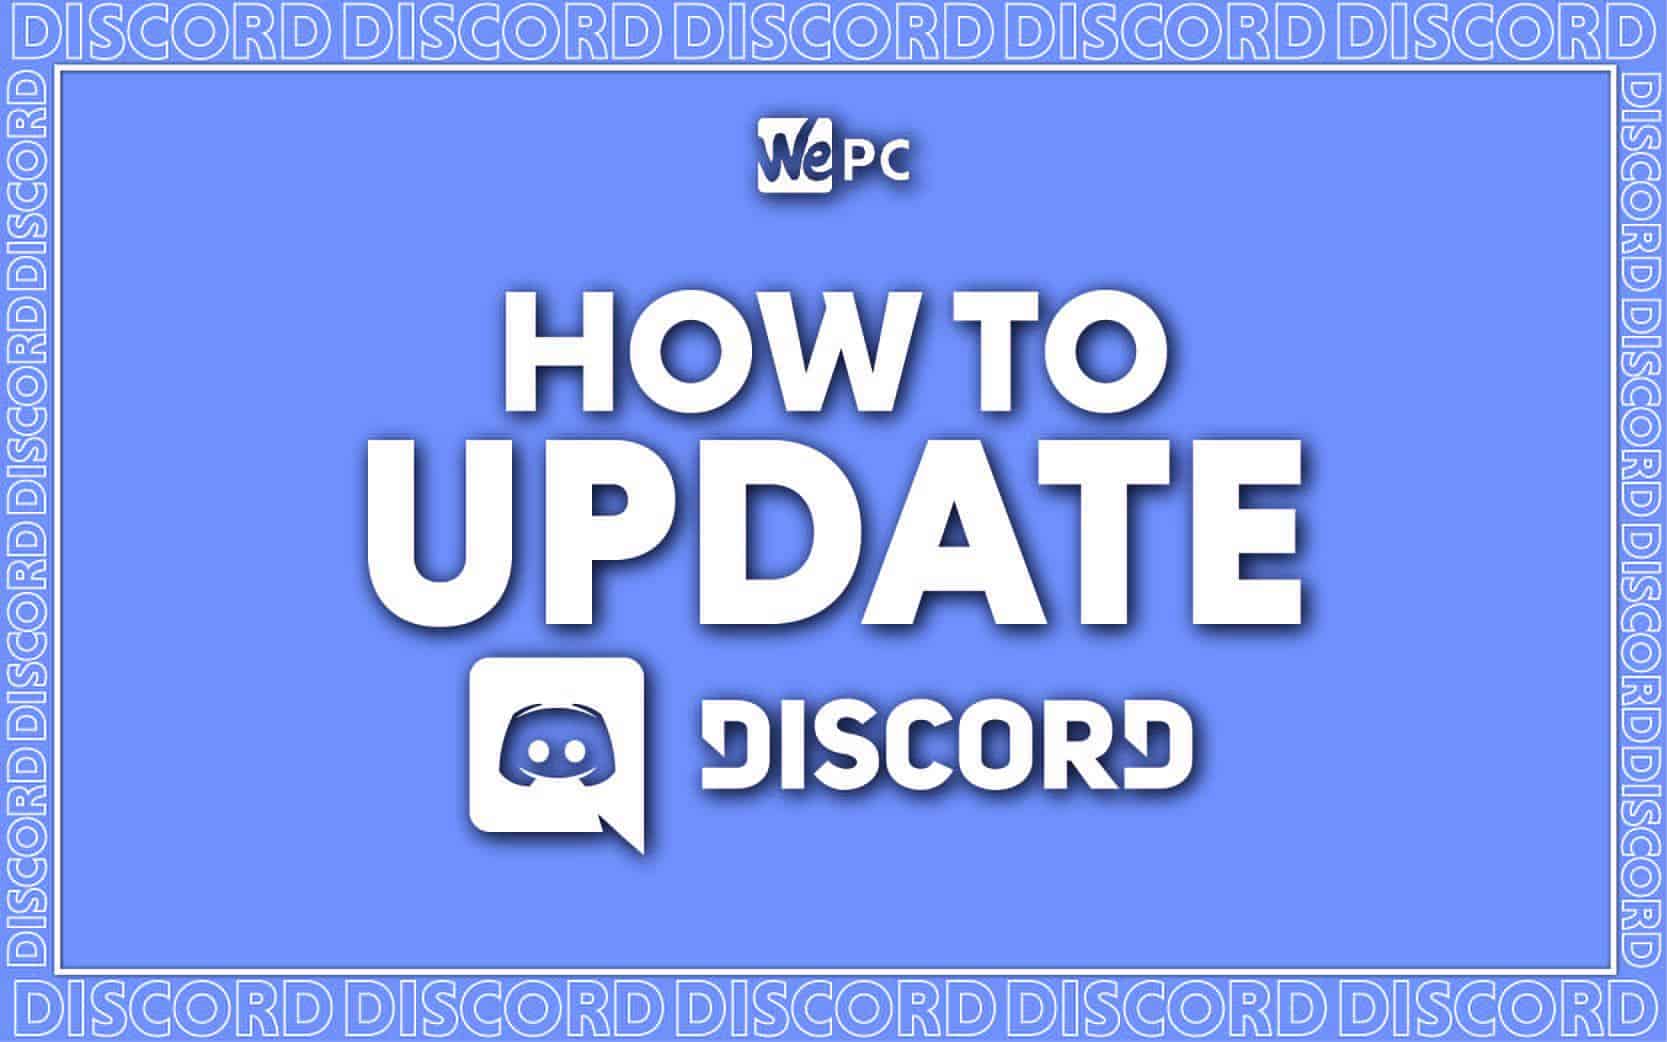 So the Minecraft Discord is full. Any way I can still join? (I didnt even  know Discord servers have a maximum member count lol) : r/discordapp